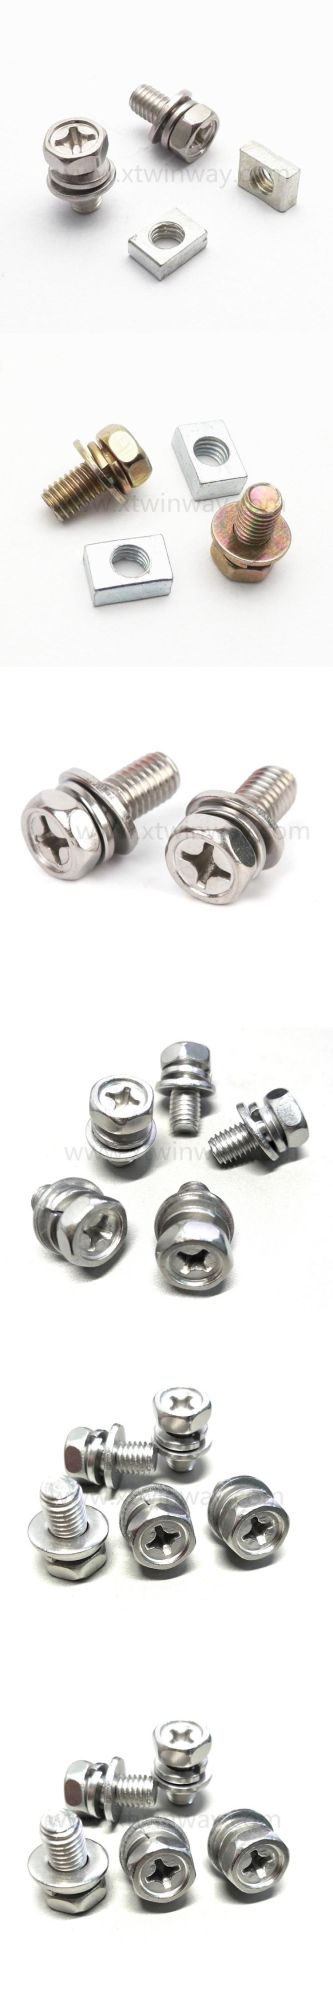 Universal Motorcycle Hard-Ware Screw Nut and Bolt Screws